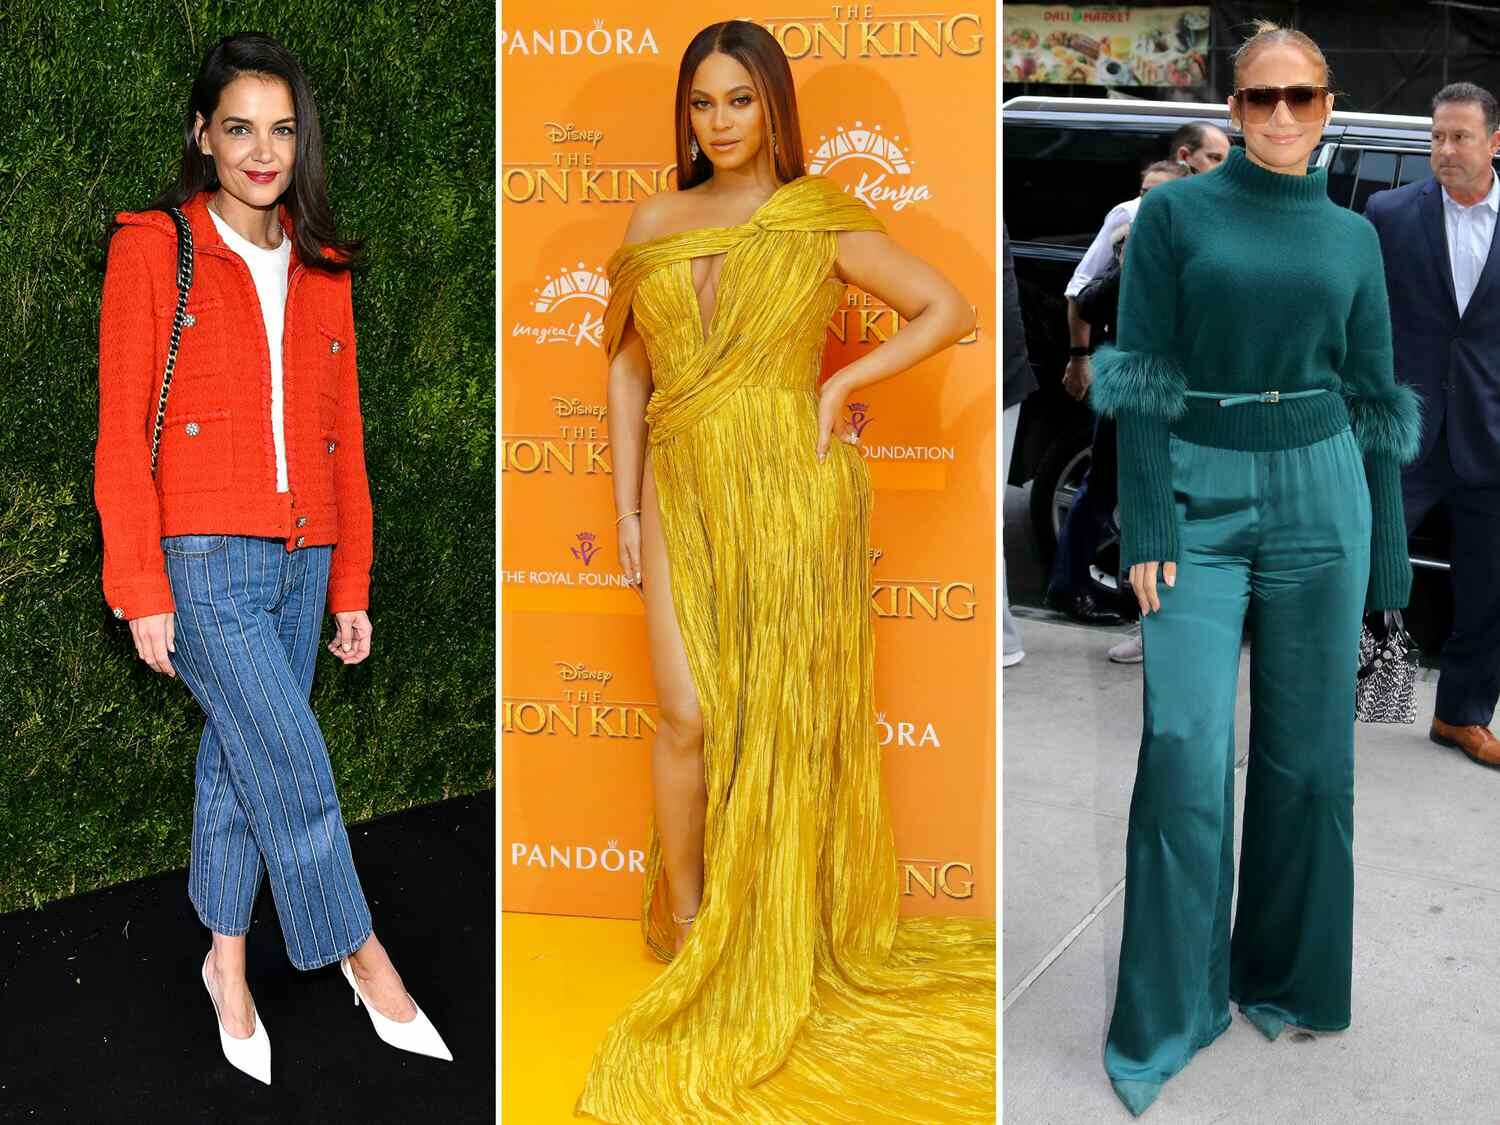 katie holmes, beyonce, and jennifer lopez in colored outfits suited to warm skin tones